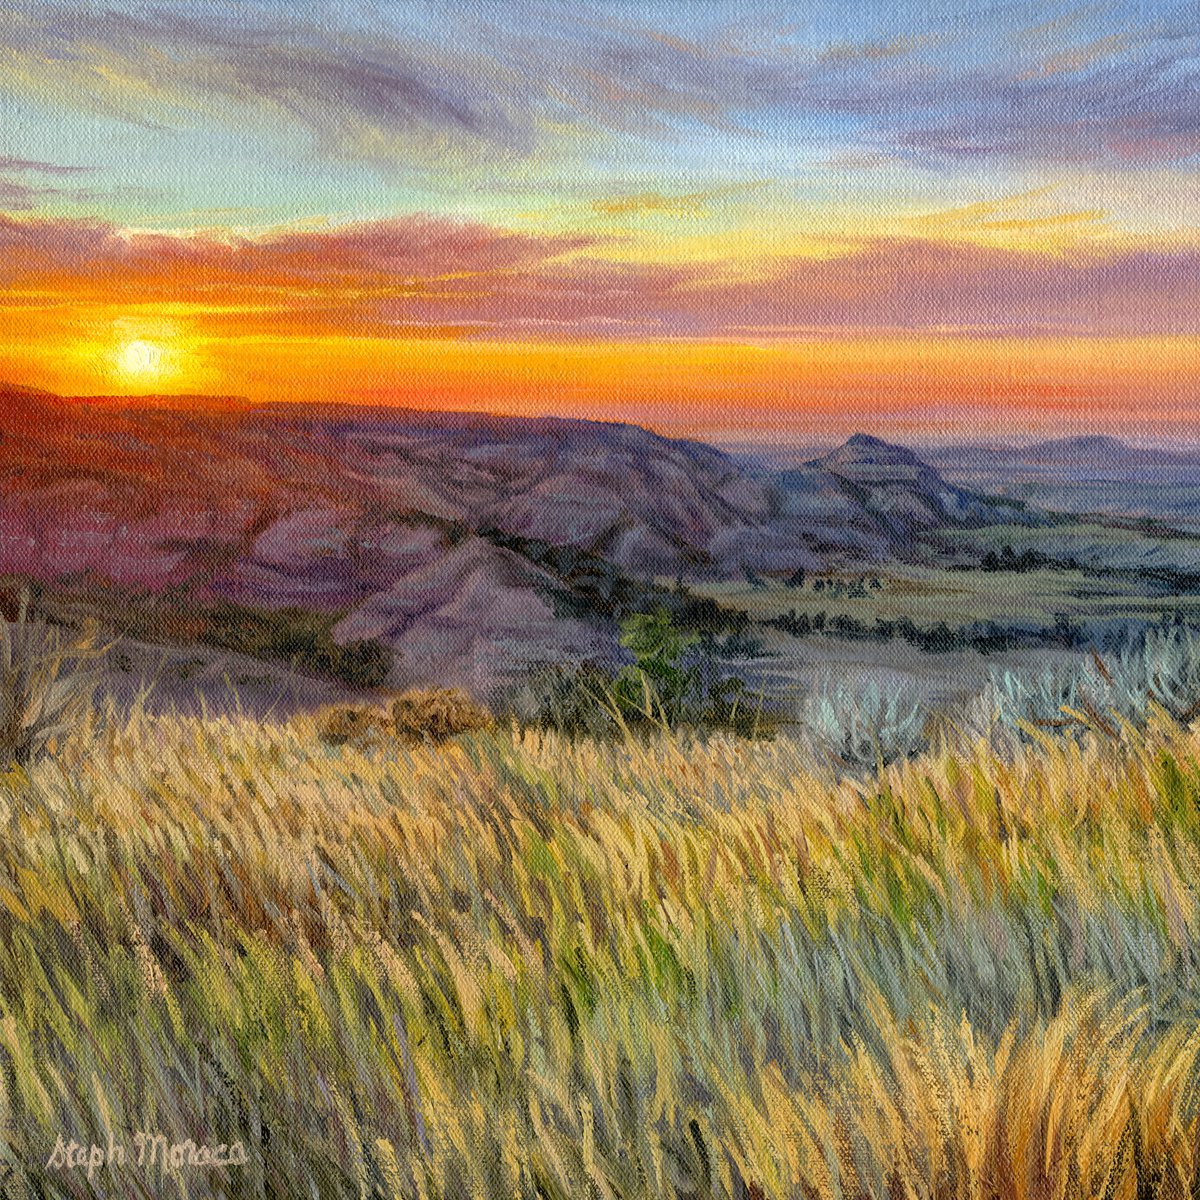 Painted Canyon Sunset by Steph Moraca